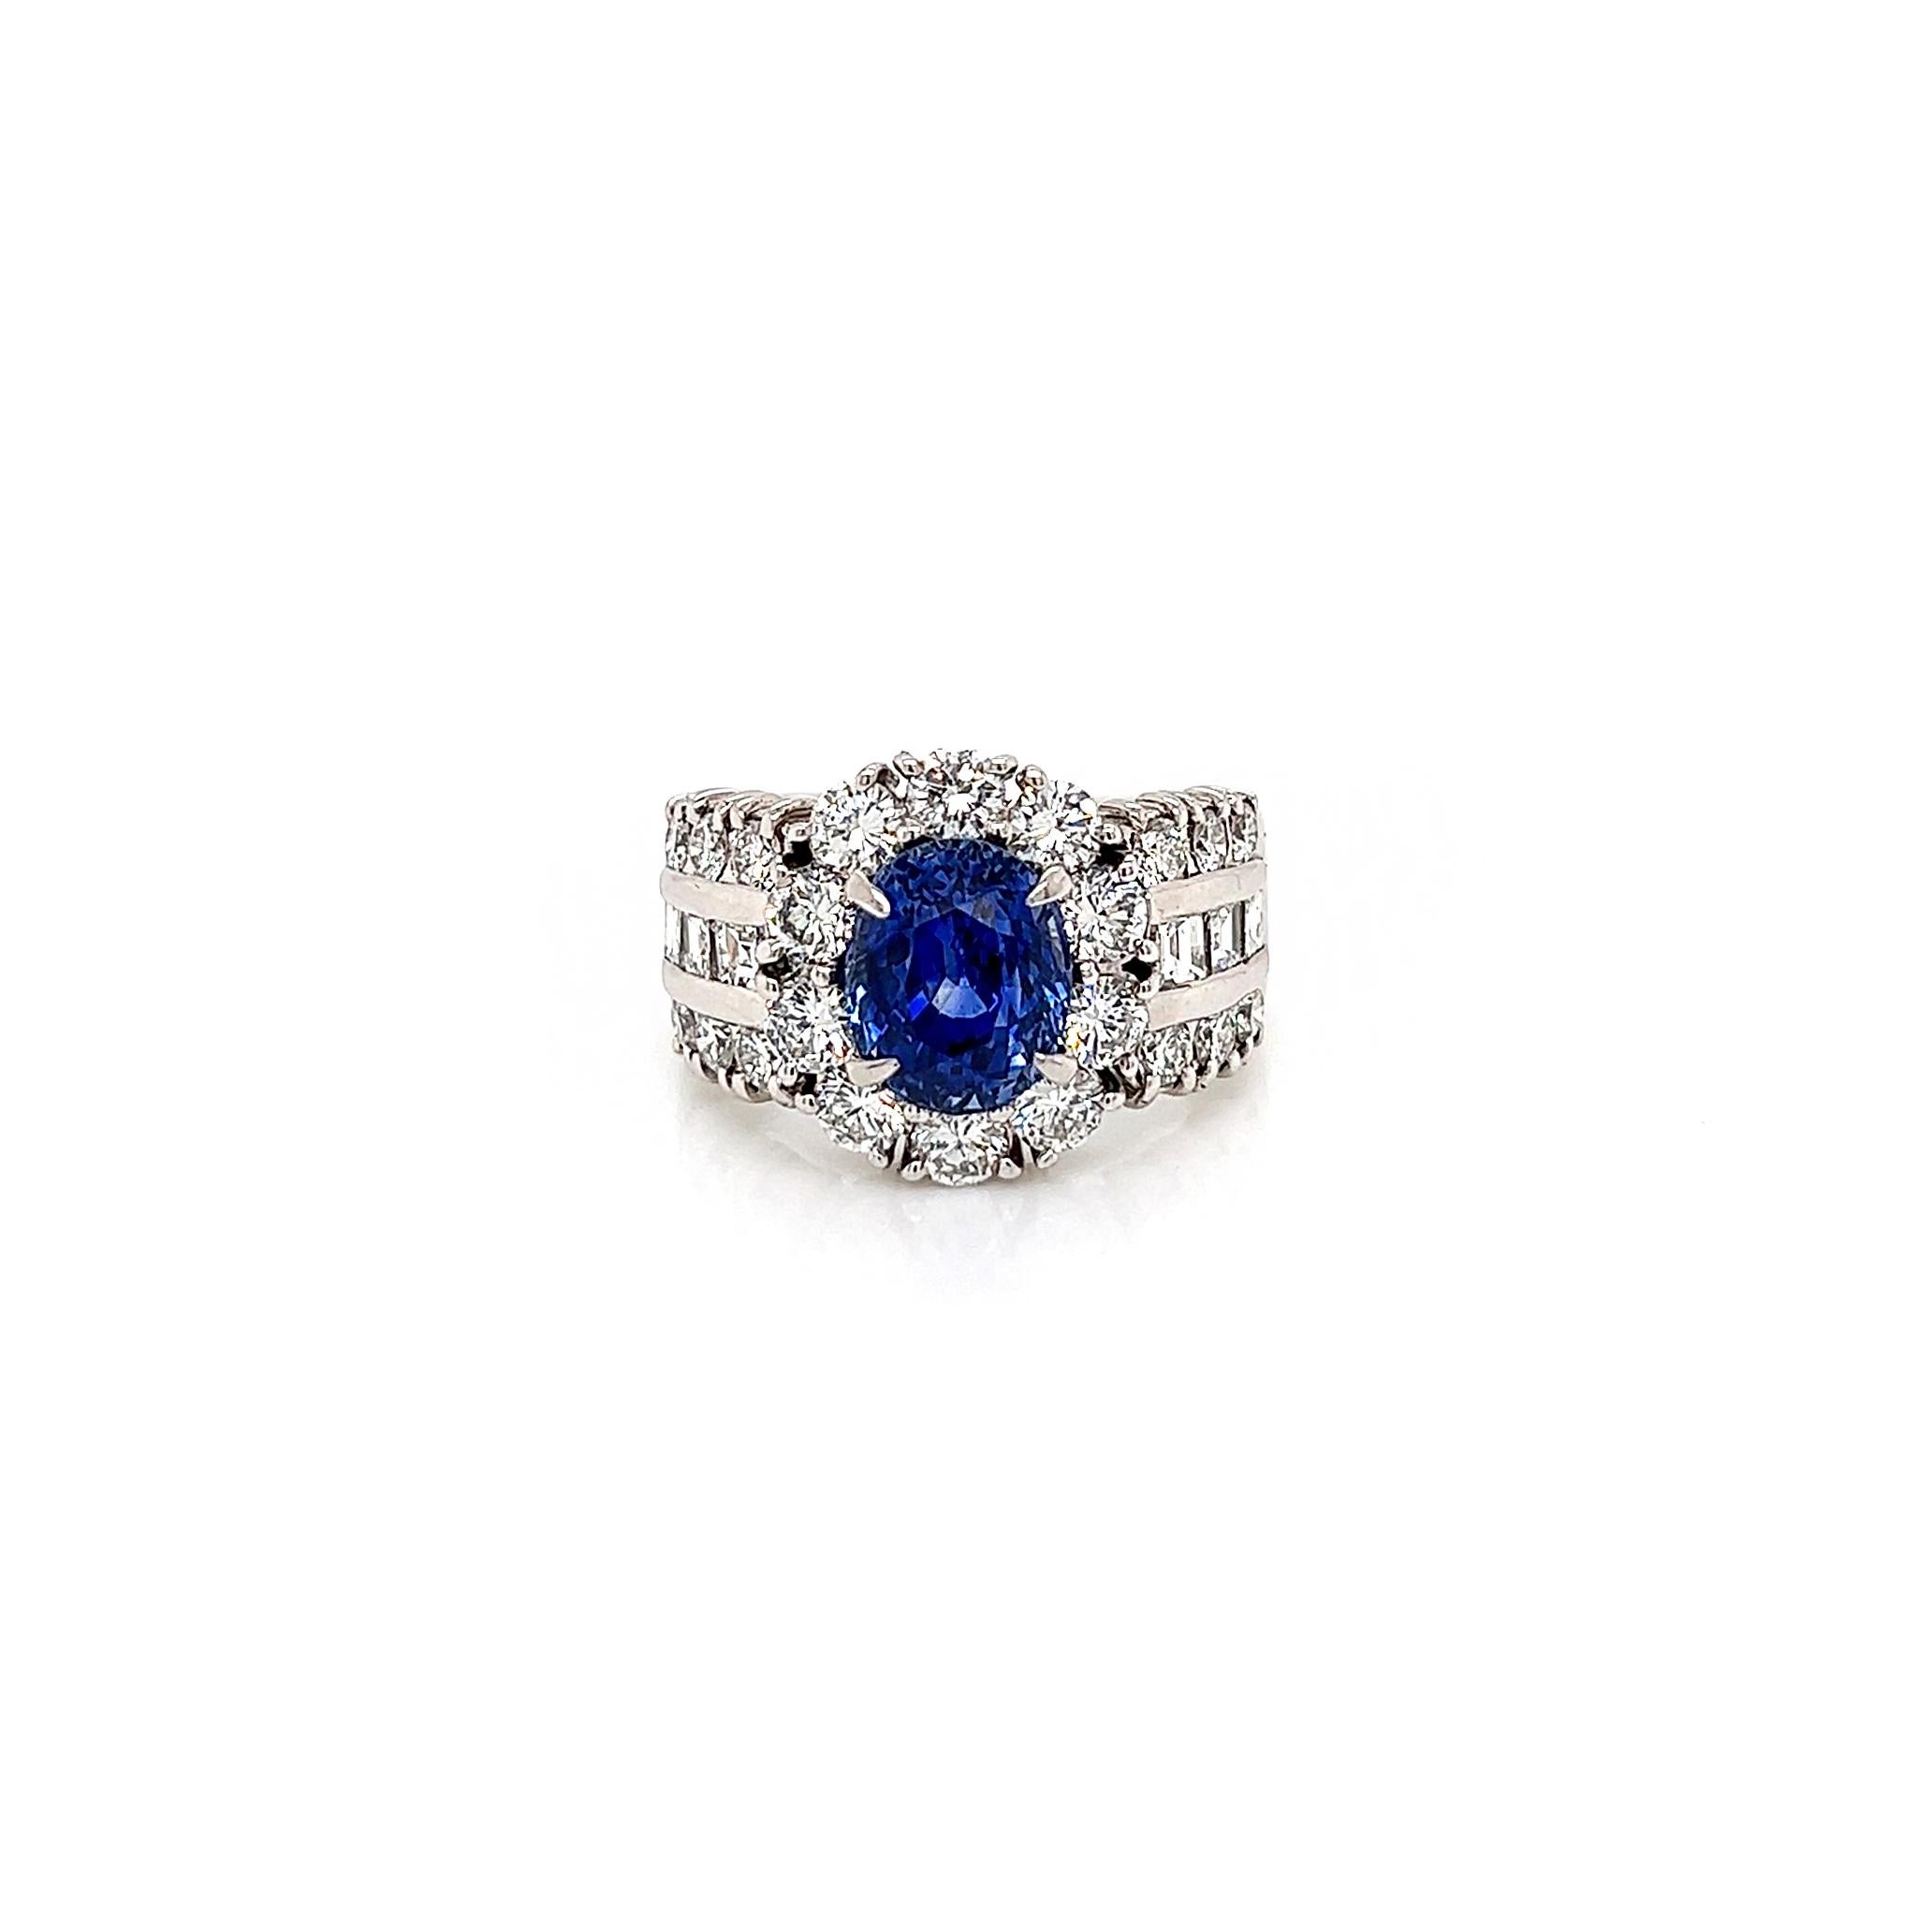 5.61 Total Carat Sapphire and Diamond Halo Channel-Set Ladies Ring

-Metal Type: Platinum
-3.37 Carat Oval Cut Natural Blue Sapphire 
-2.24 Carat Round and Square Baguette Natural Diamonds
     ~Round Stones: E-F Color, VS Clarity 
     ~Square